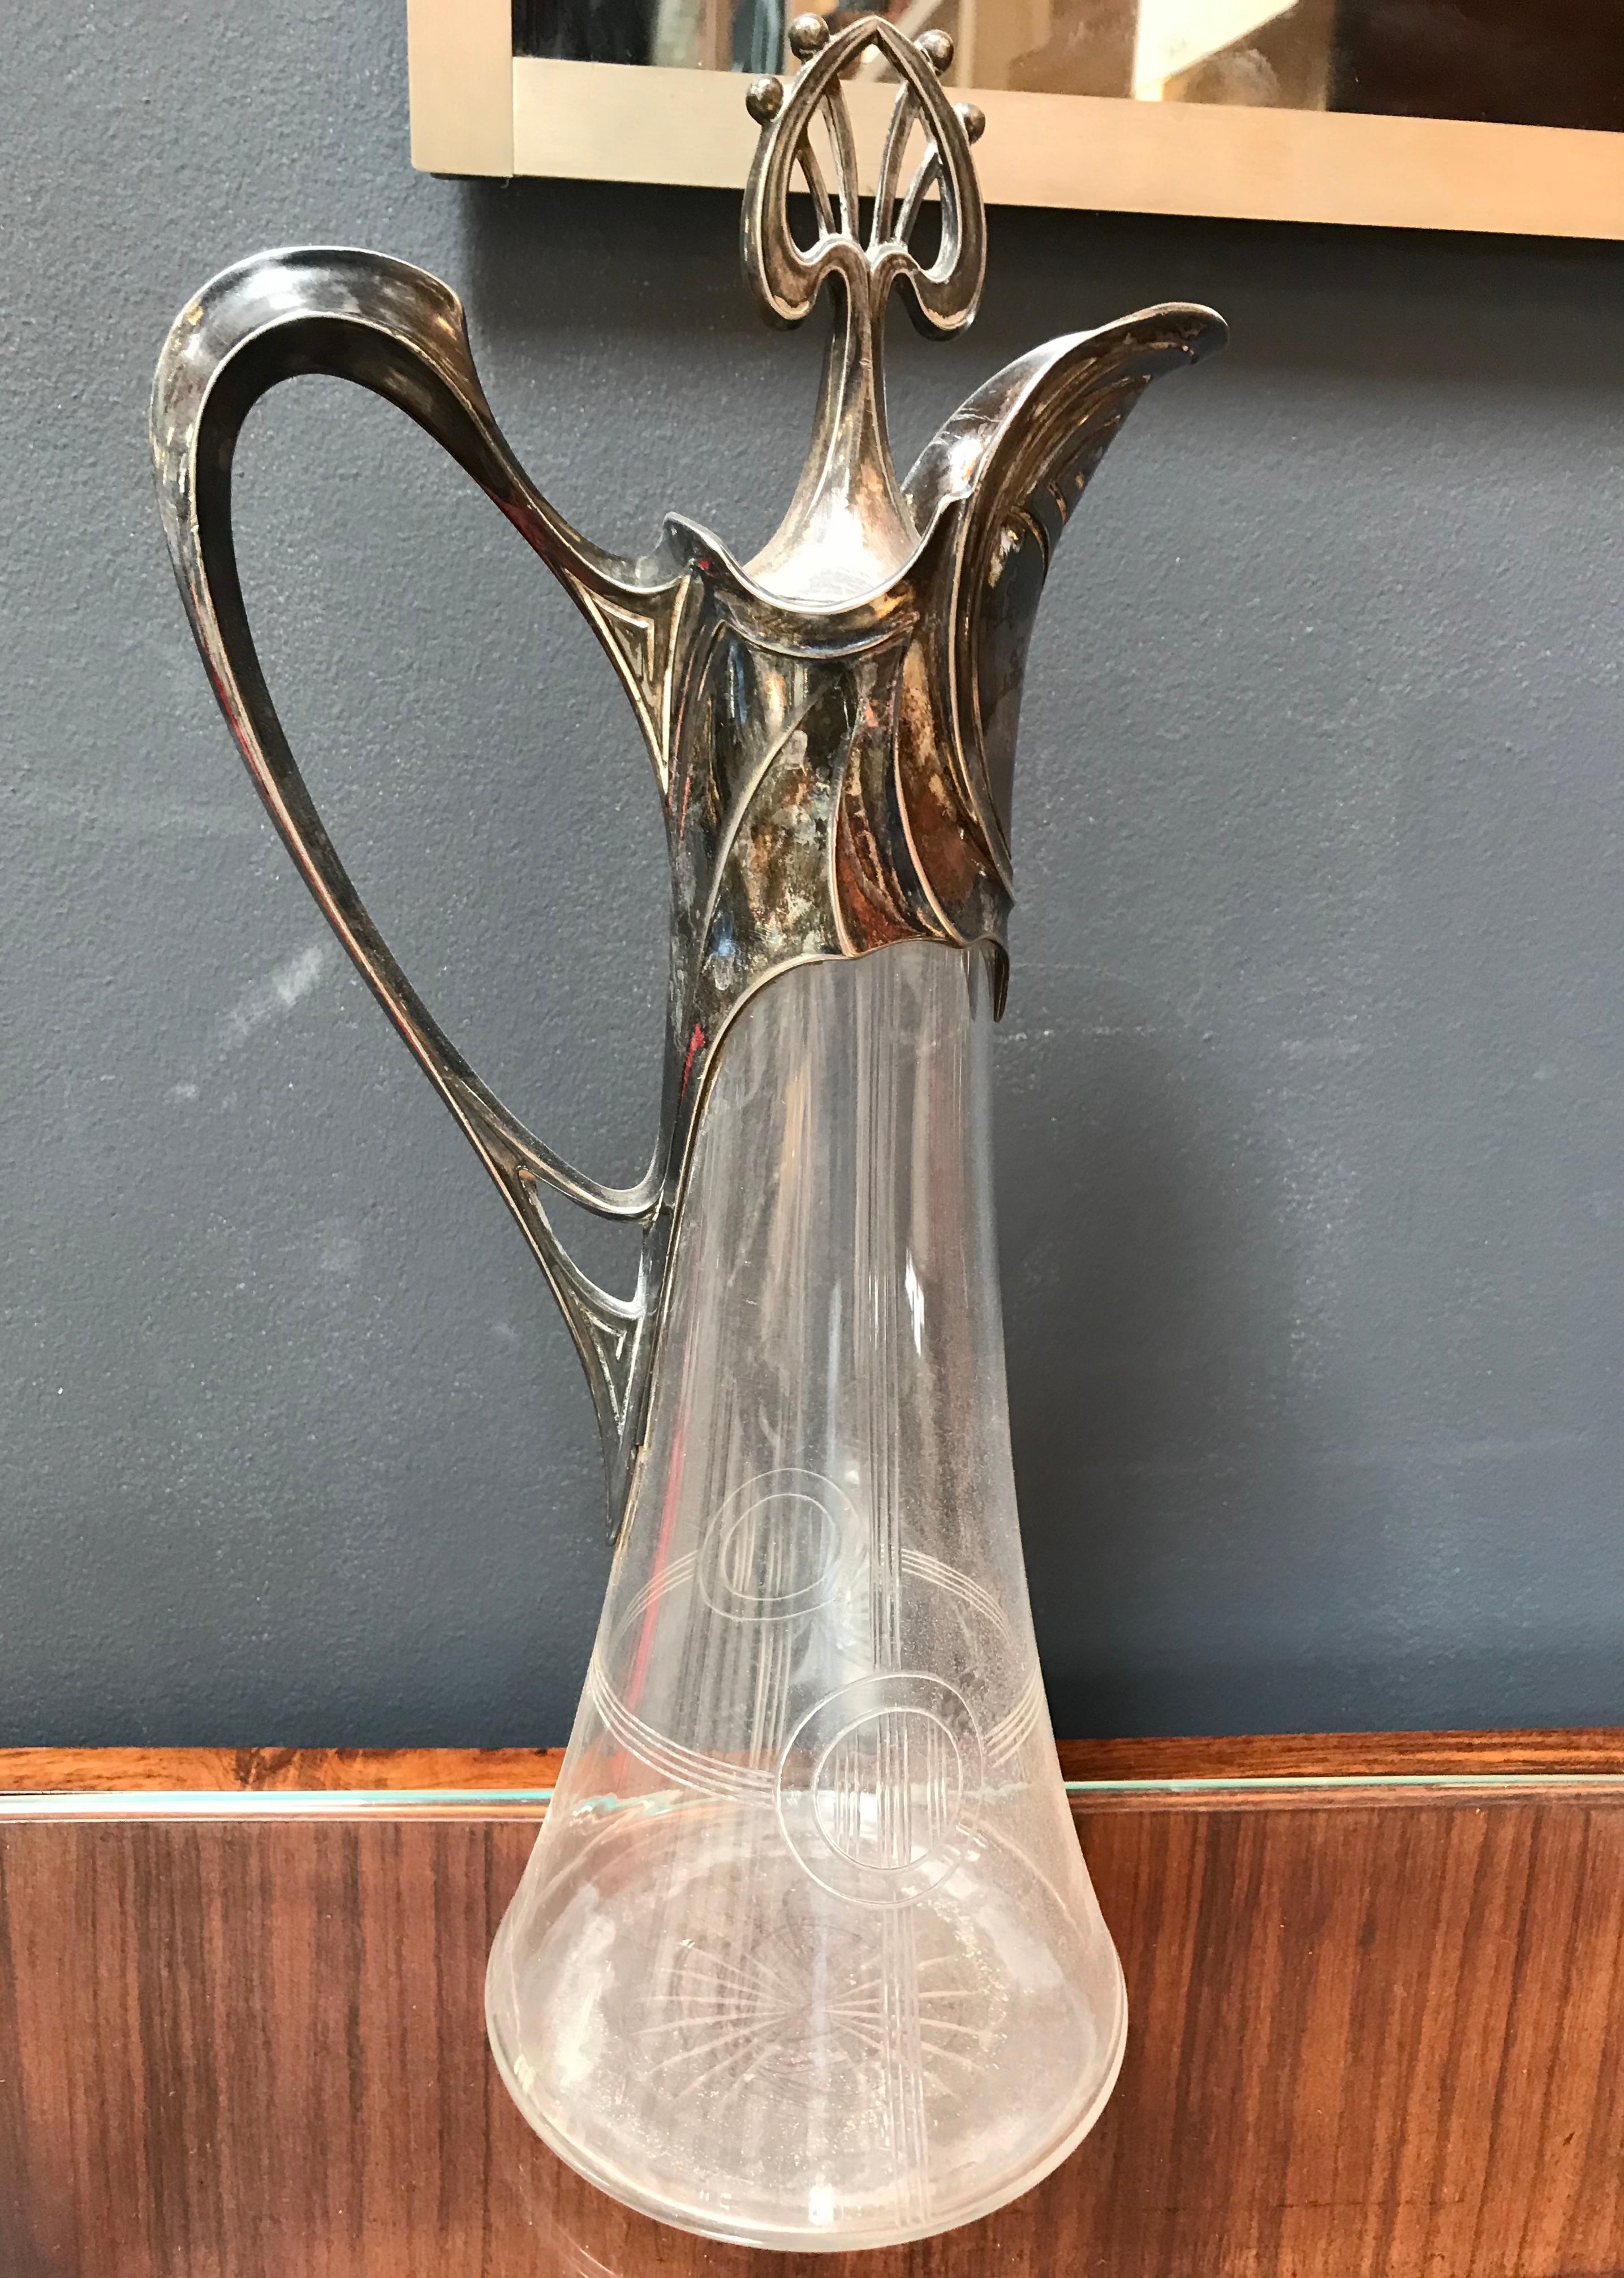 Rare Art Deco silver plate and crystal set of 2 pitcher, Italy, 1930s.